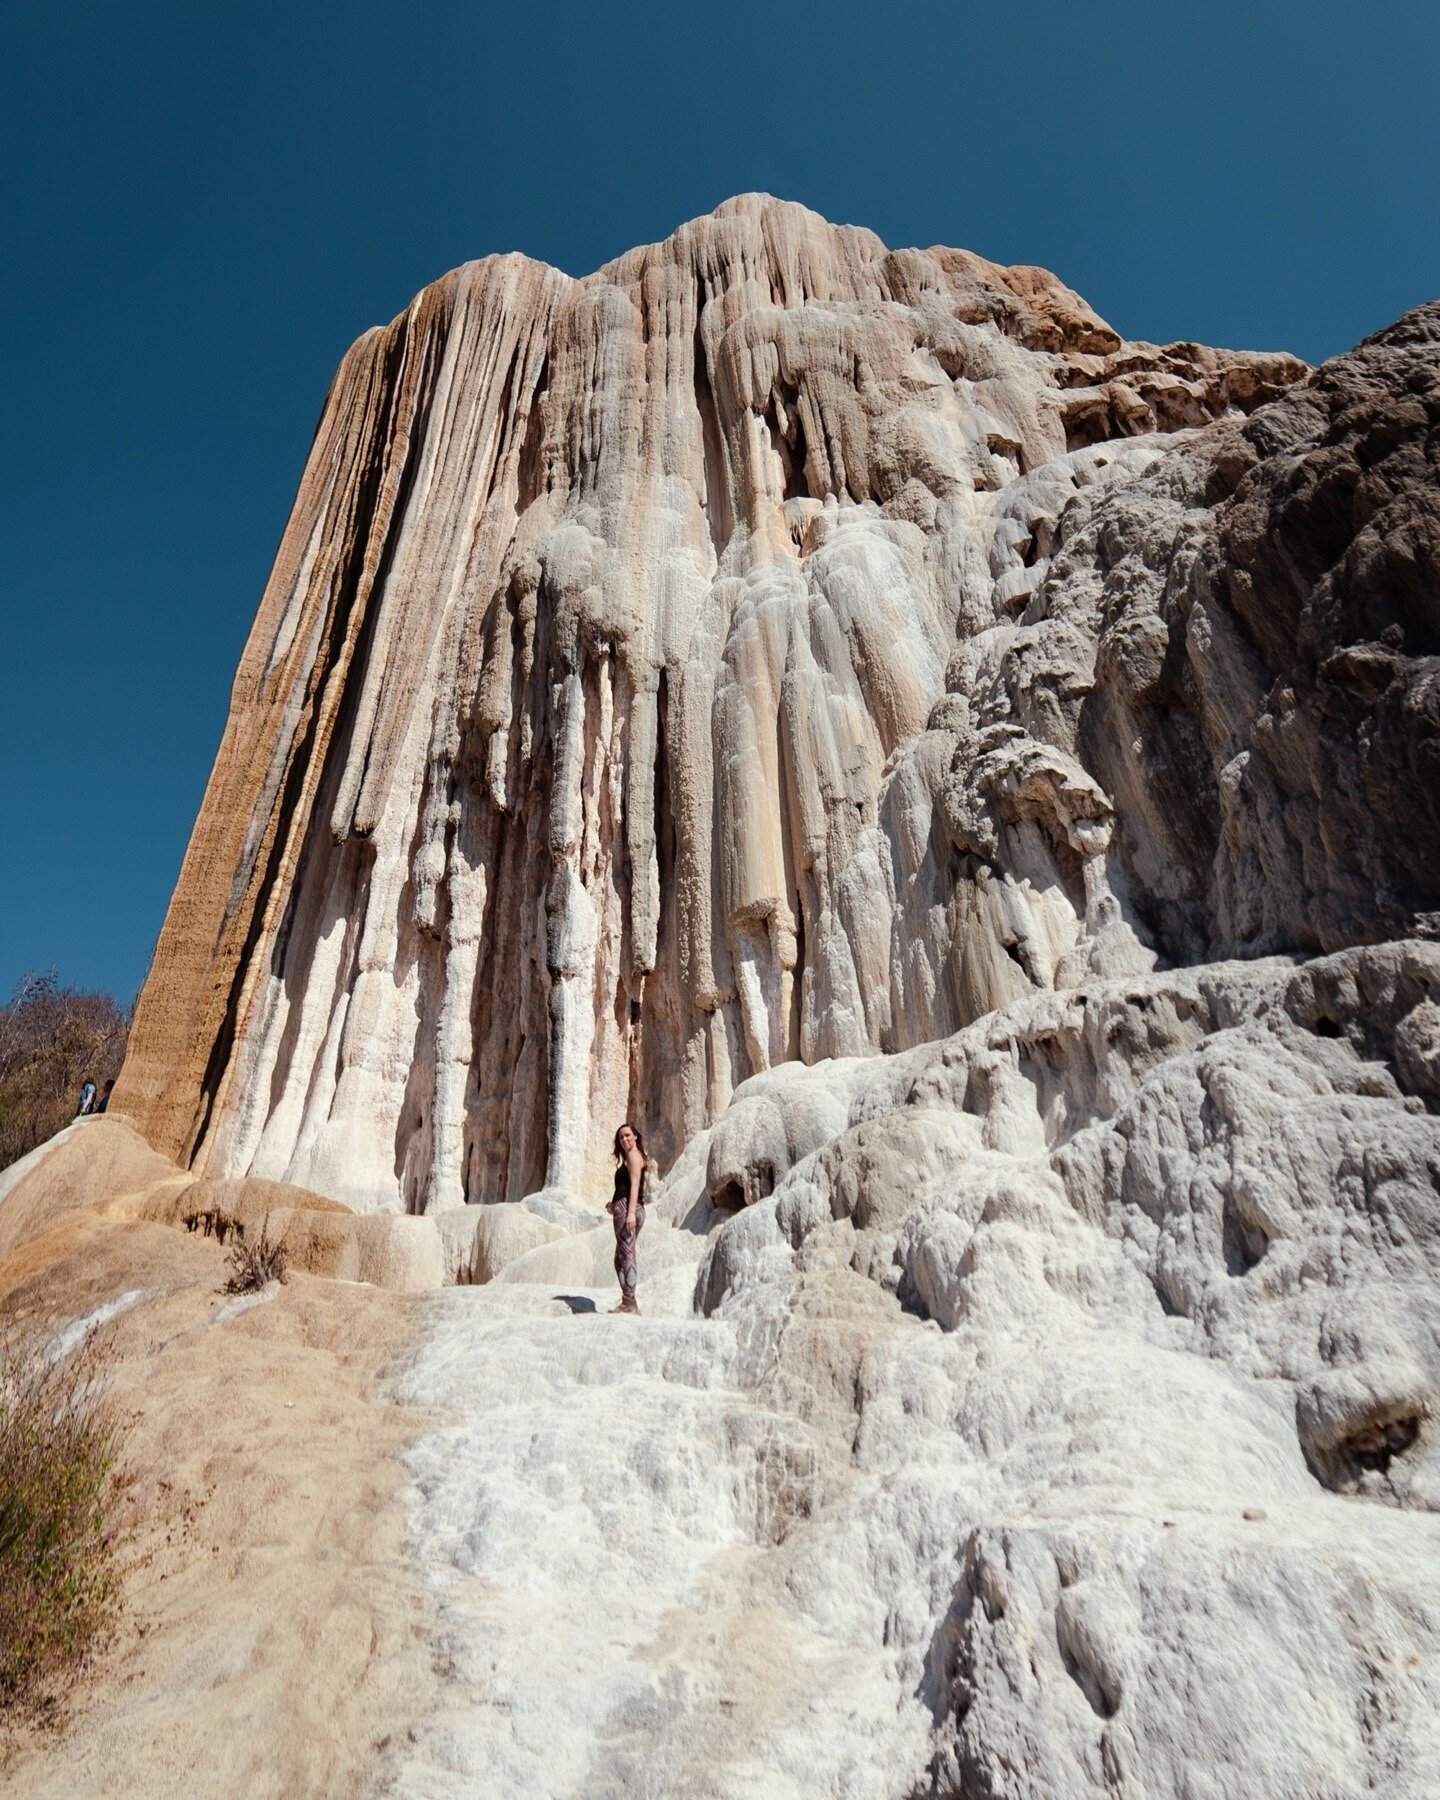 &lsquo;Cascada grande&rsquo; is a natural wonder found deep in the dry desert-like landscape of Oaxaca. This 90m tall formation has been built over time from the hot springs that tumble over the cliffside above, depositing calcium carbonate in their 